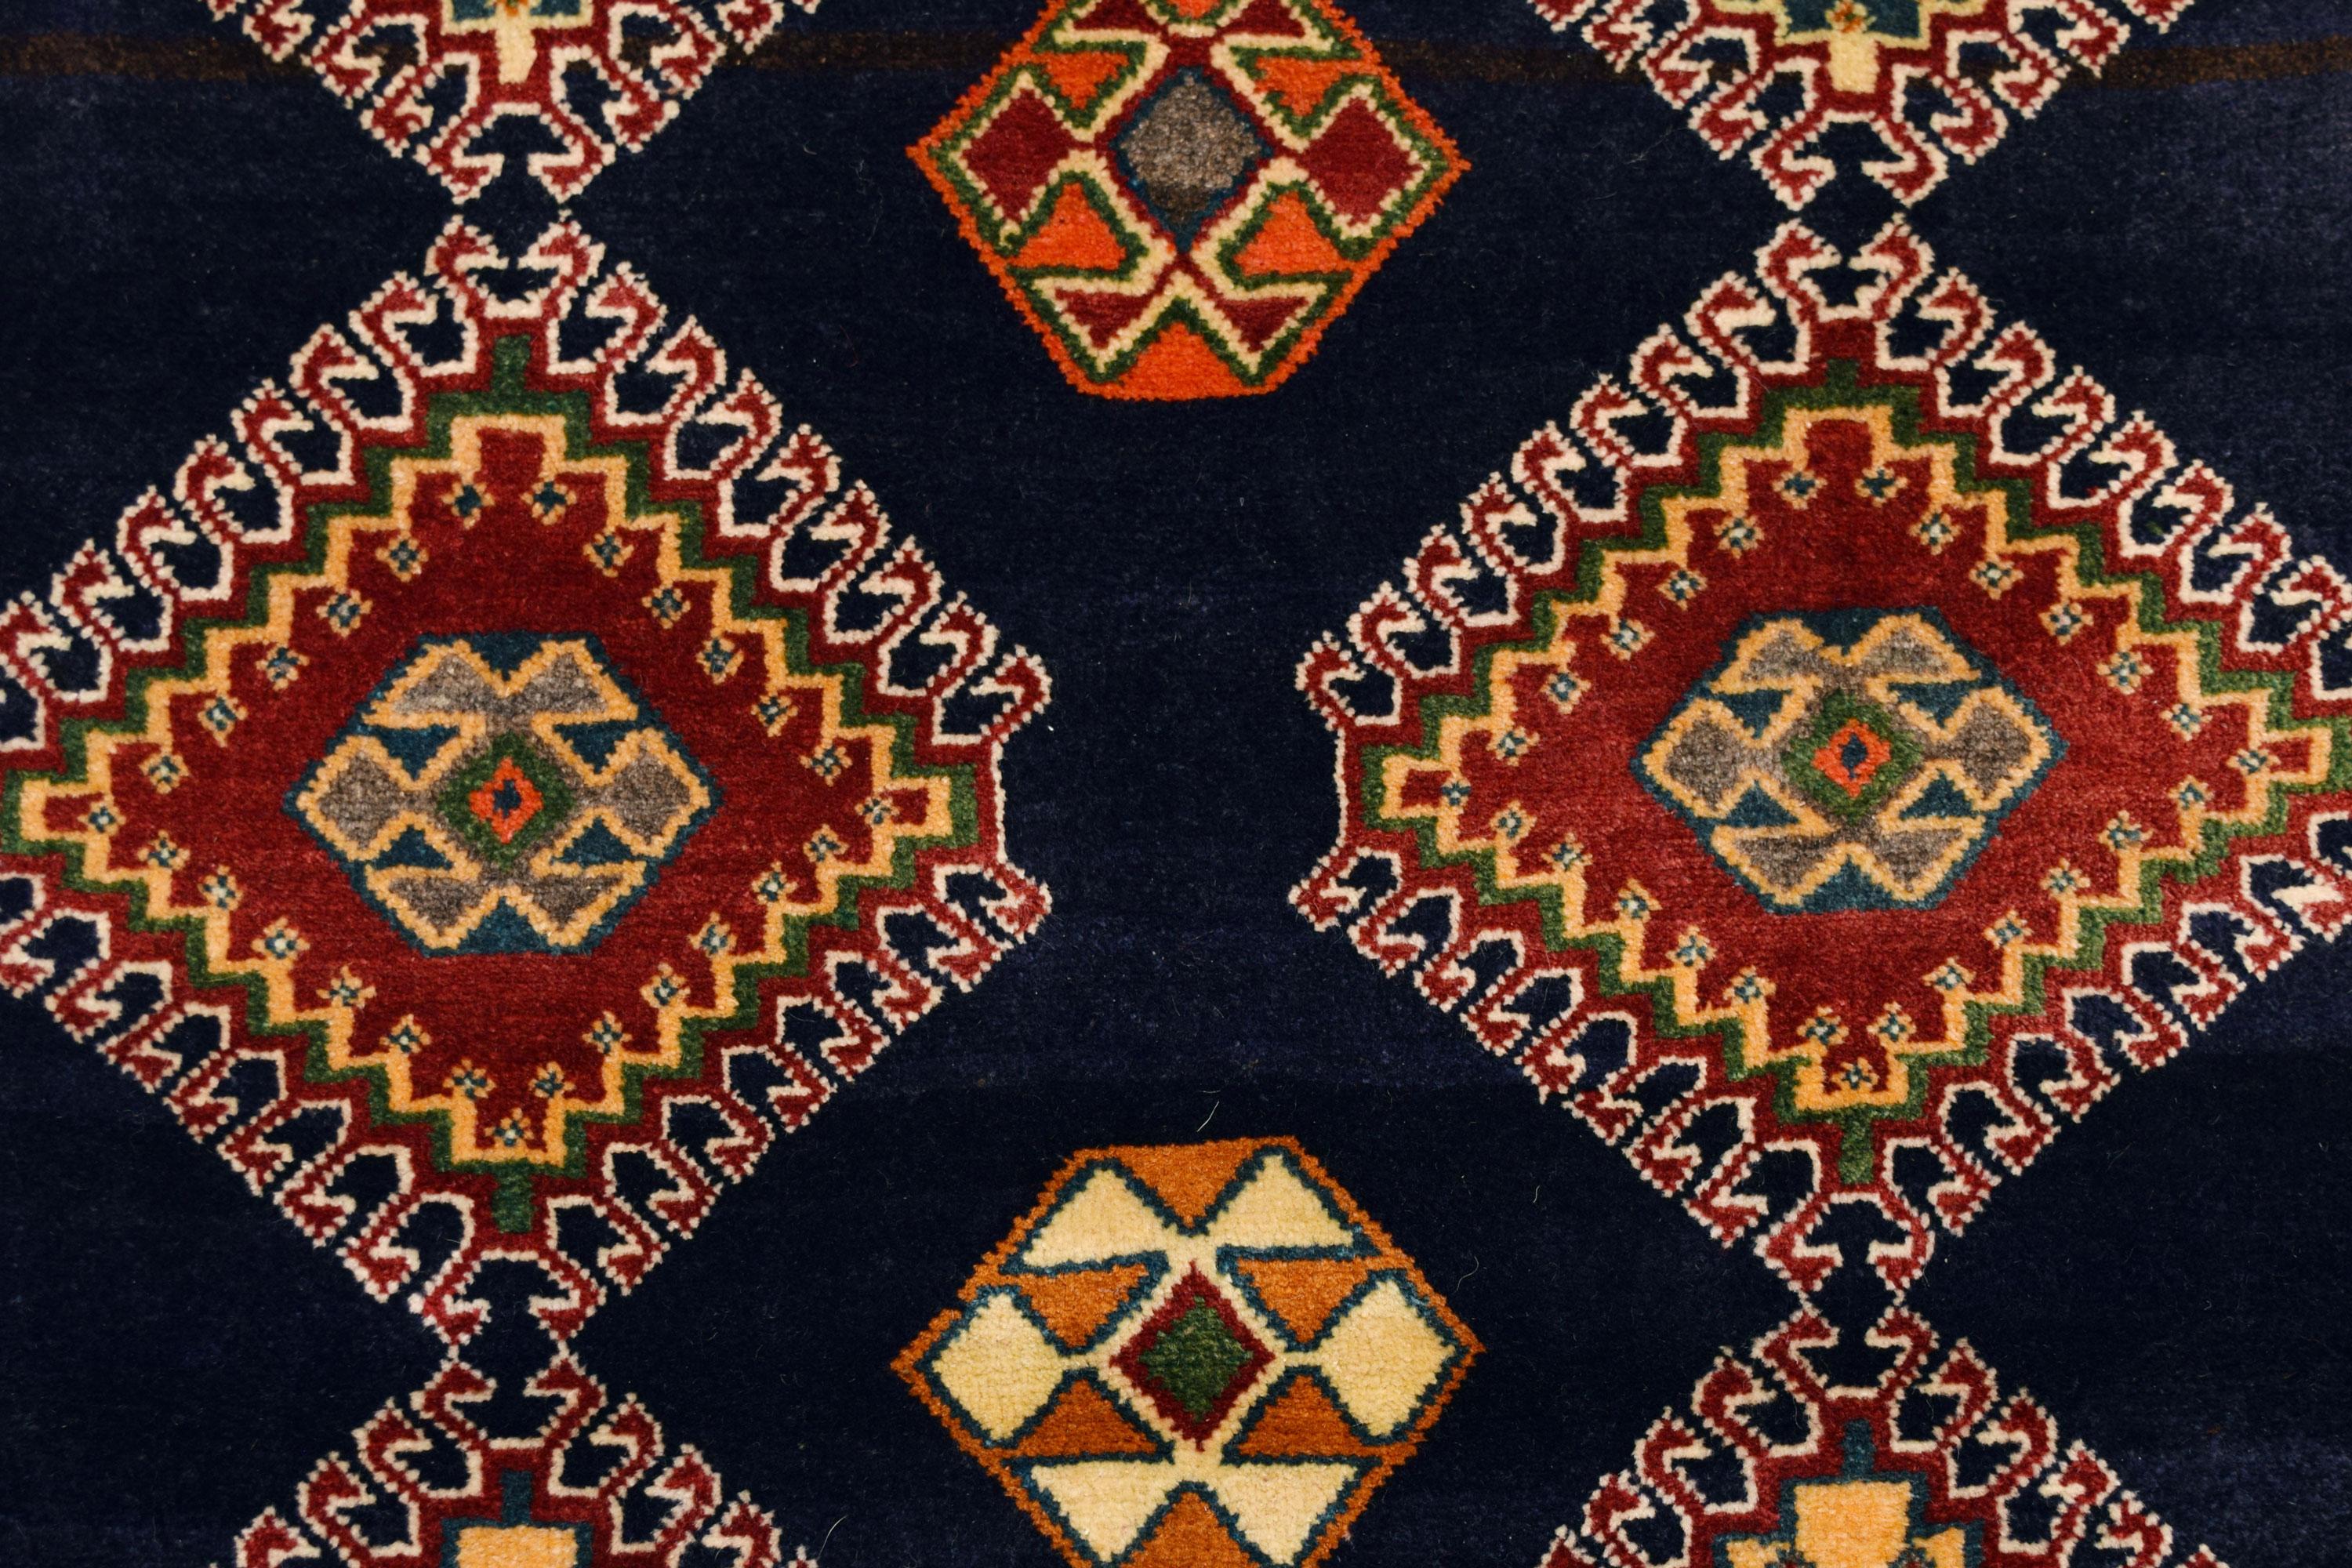 Imitating the enchantment and allure of a Persian flower garden, this Persian Qashqai carpet is hand-knotted and measures 3’10” x 6’1”. Because this carpet utilizes a traditional Persian weaving technique, the pile is soft and plush while the